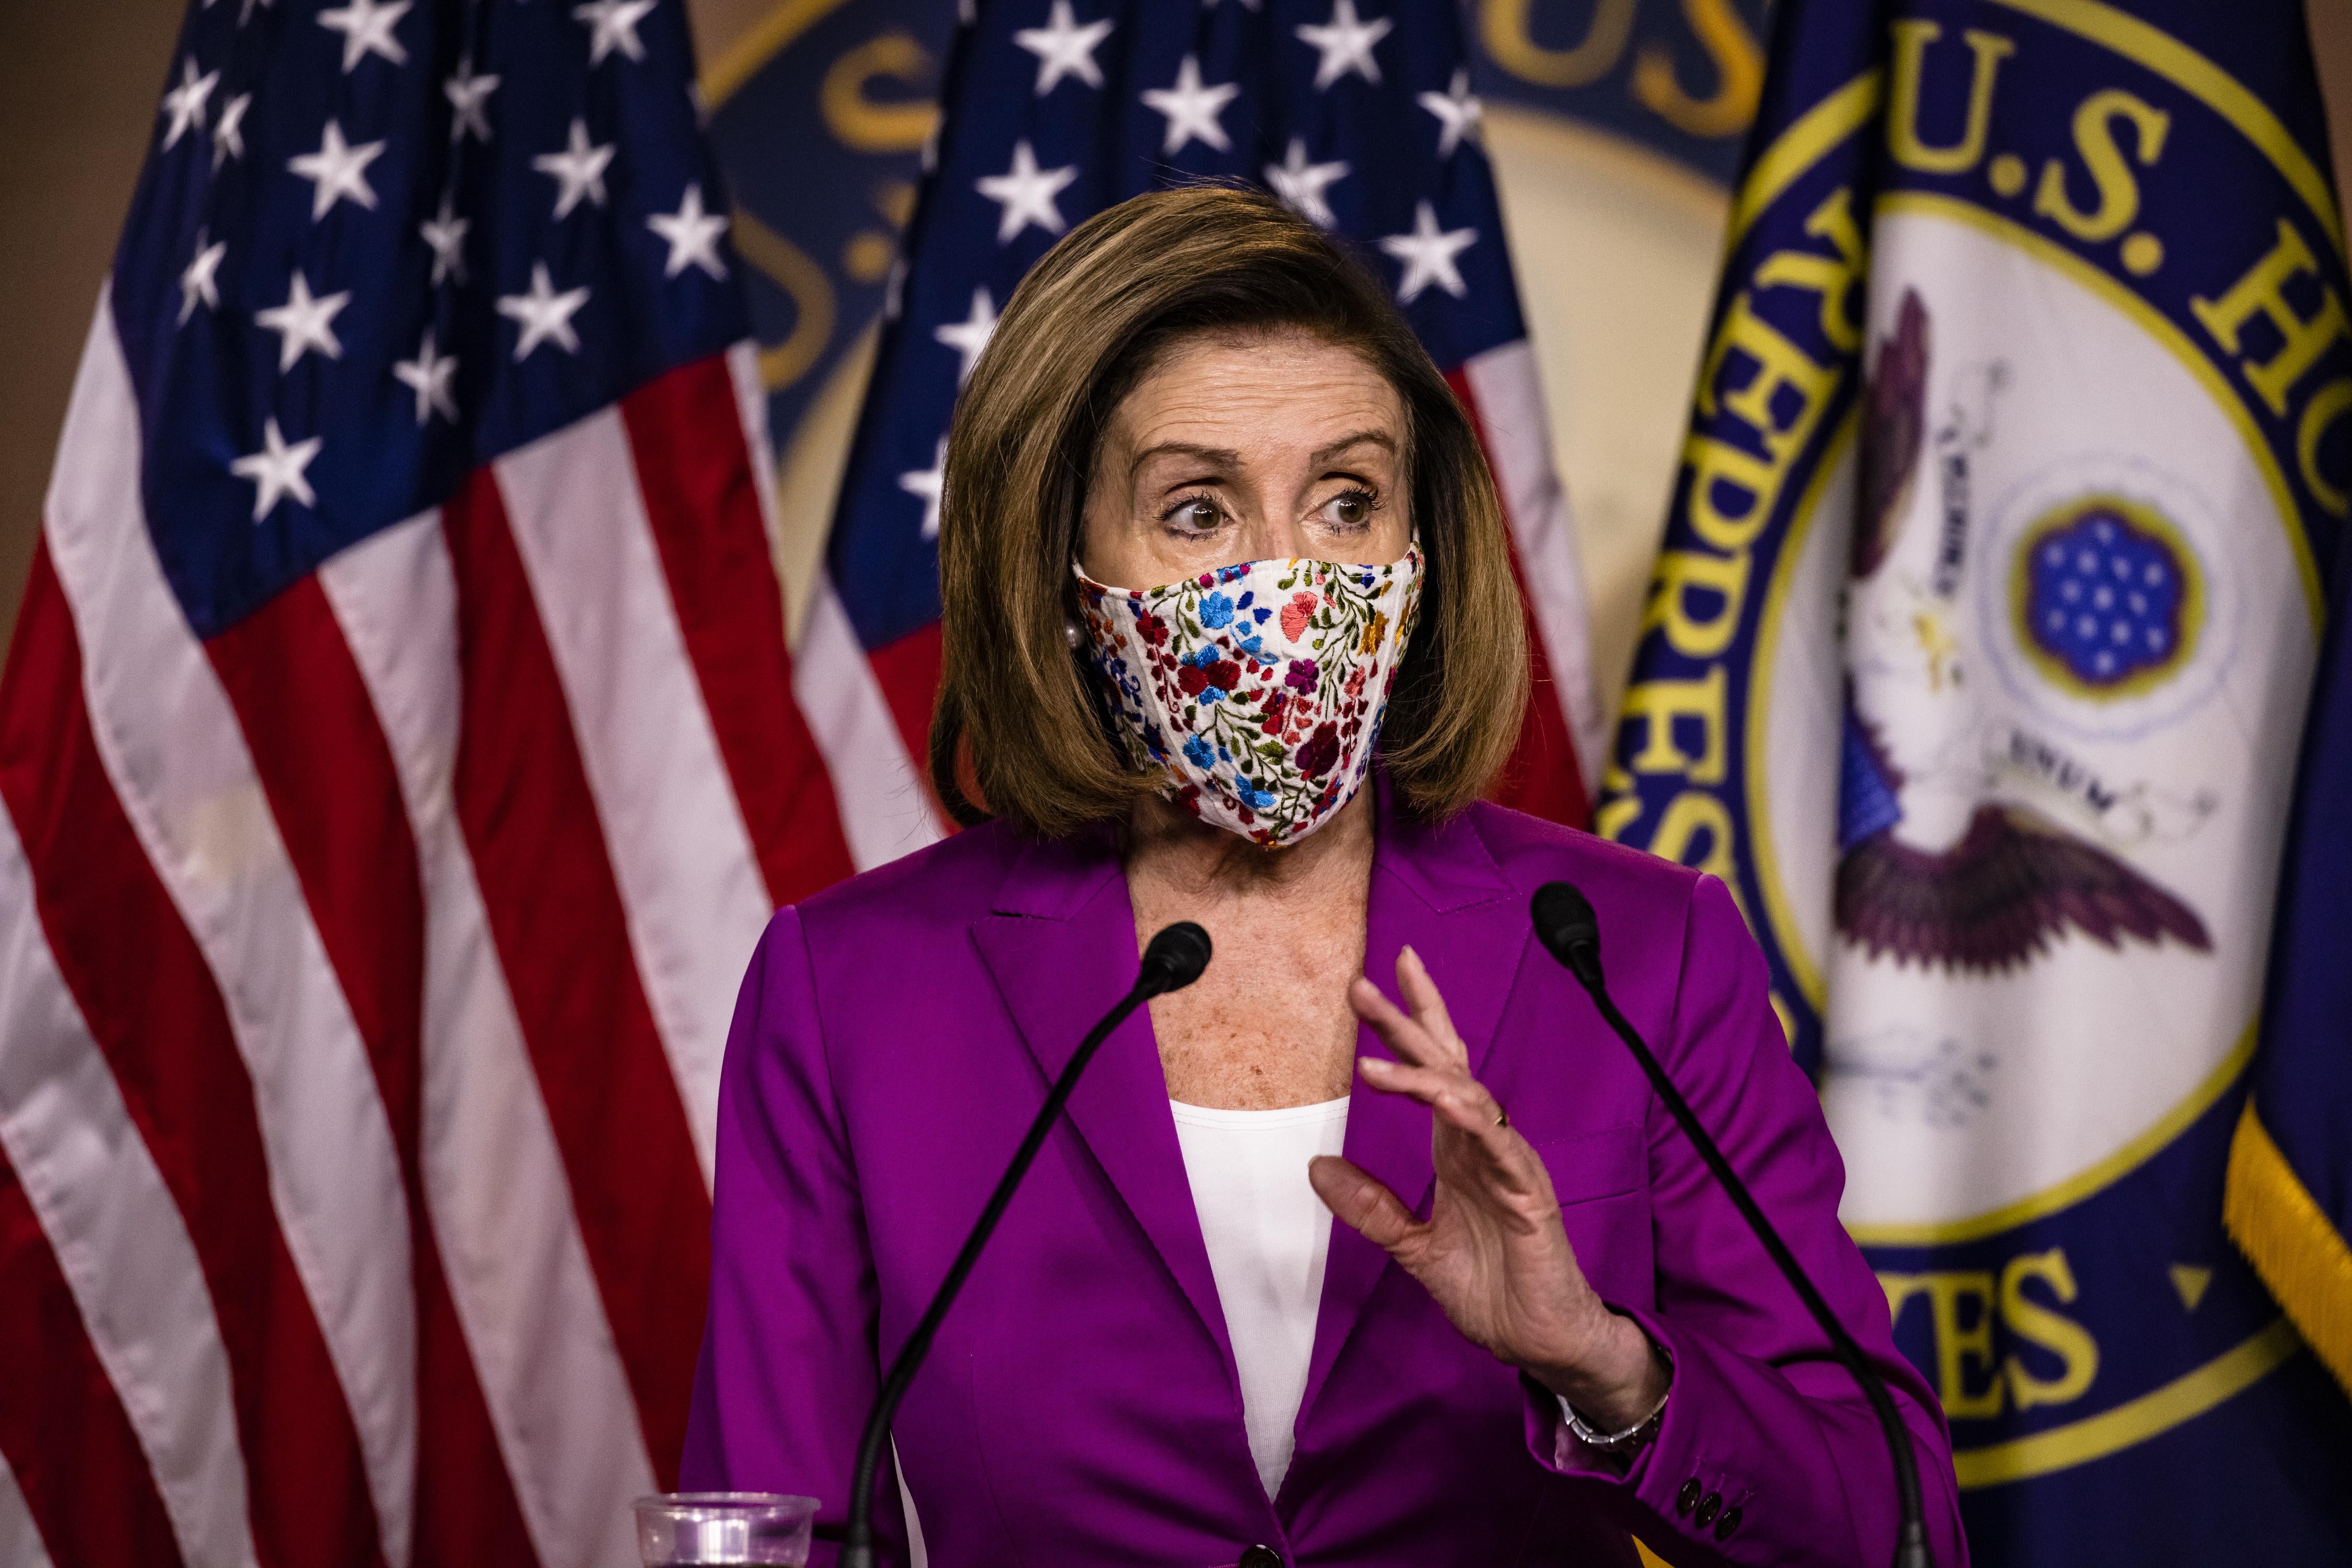 Pelosi, wearing a floral mask, speaks at a mic with American flags behind her